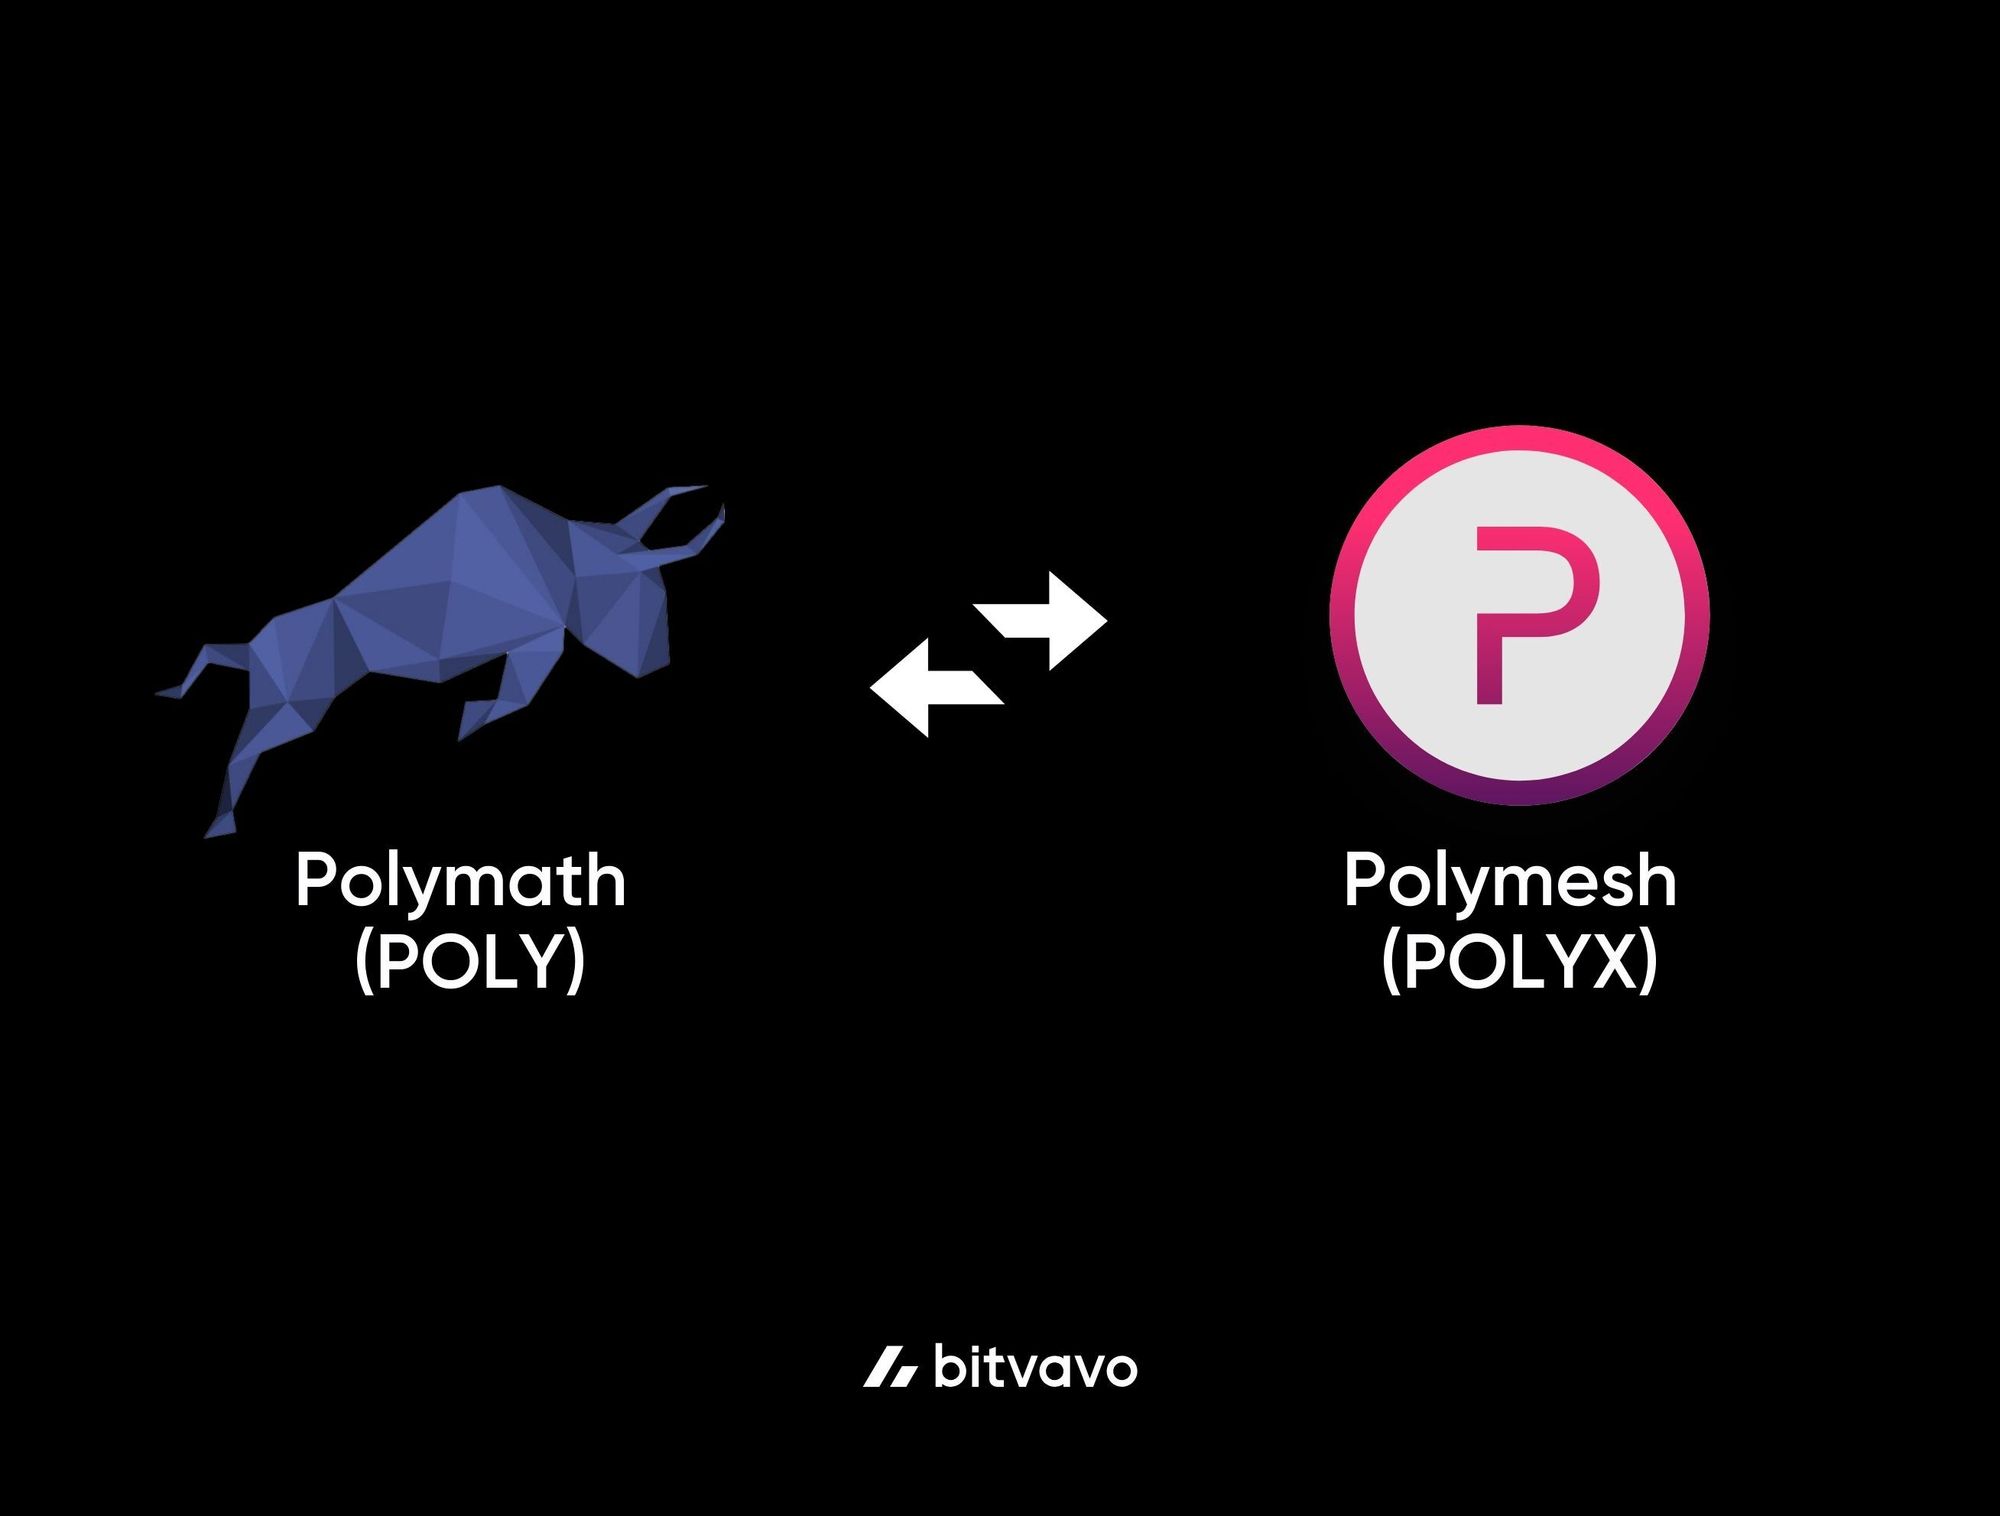 Bitvavo will swap to the Polymesh (POLYX) blockchain